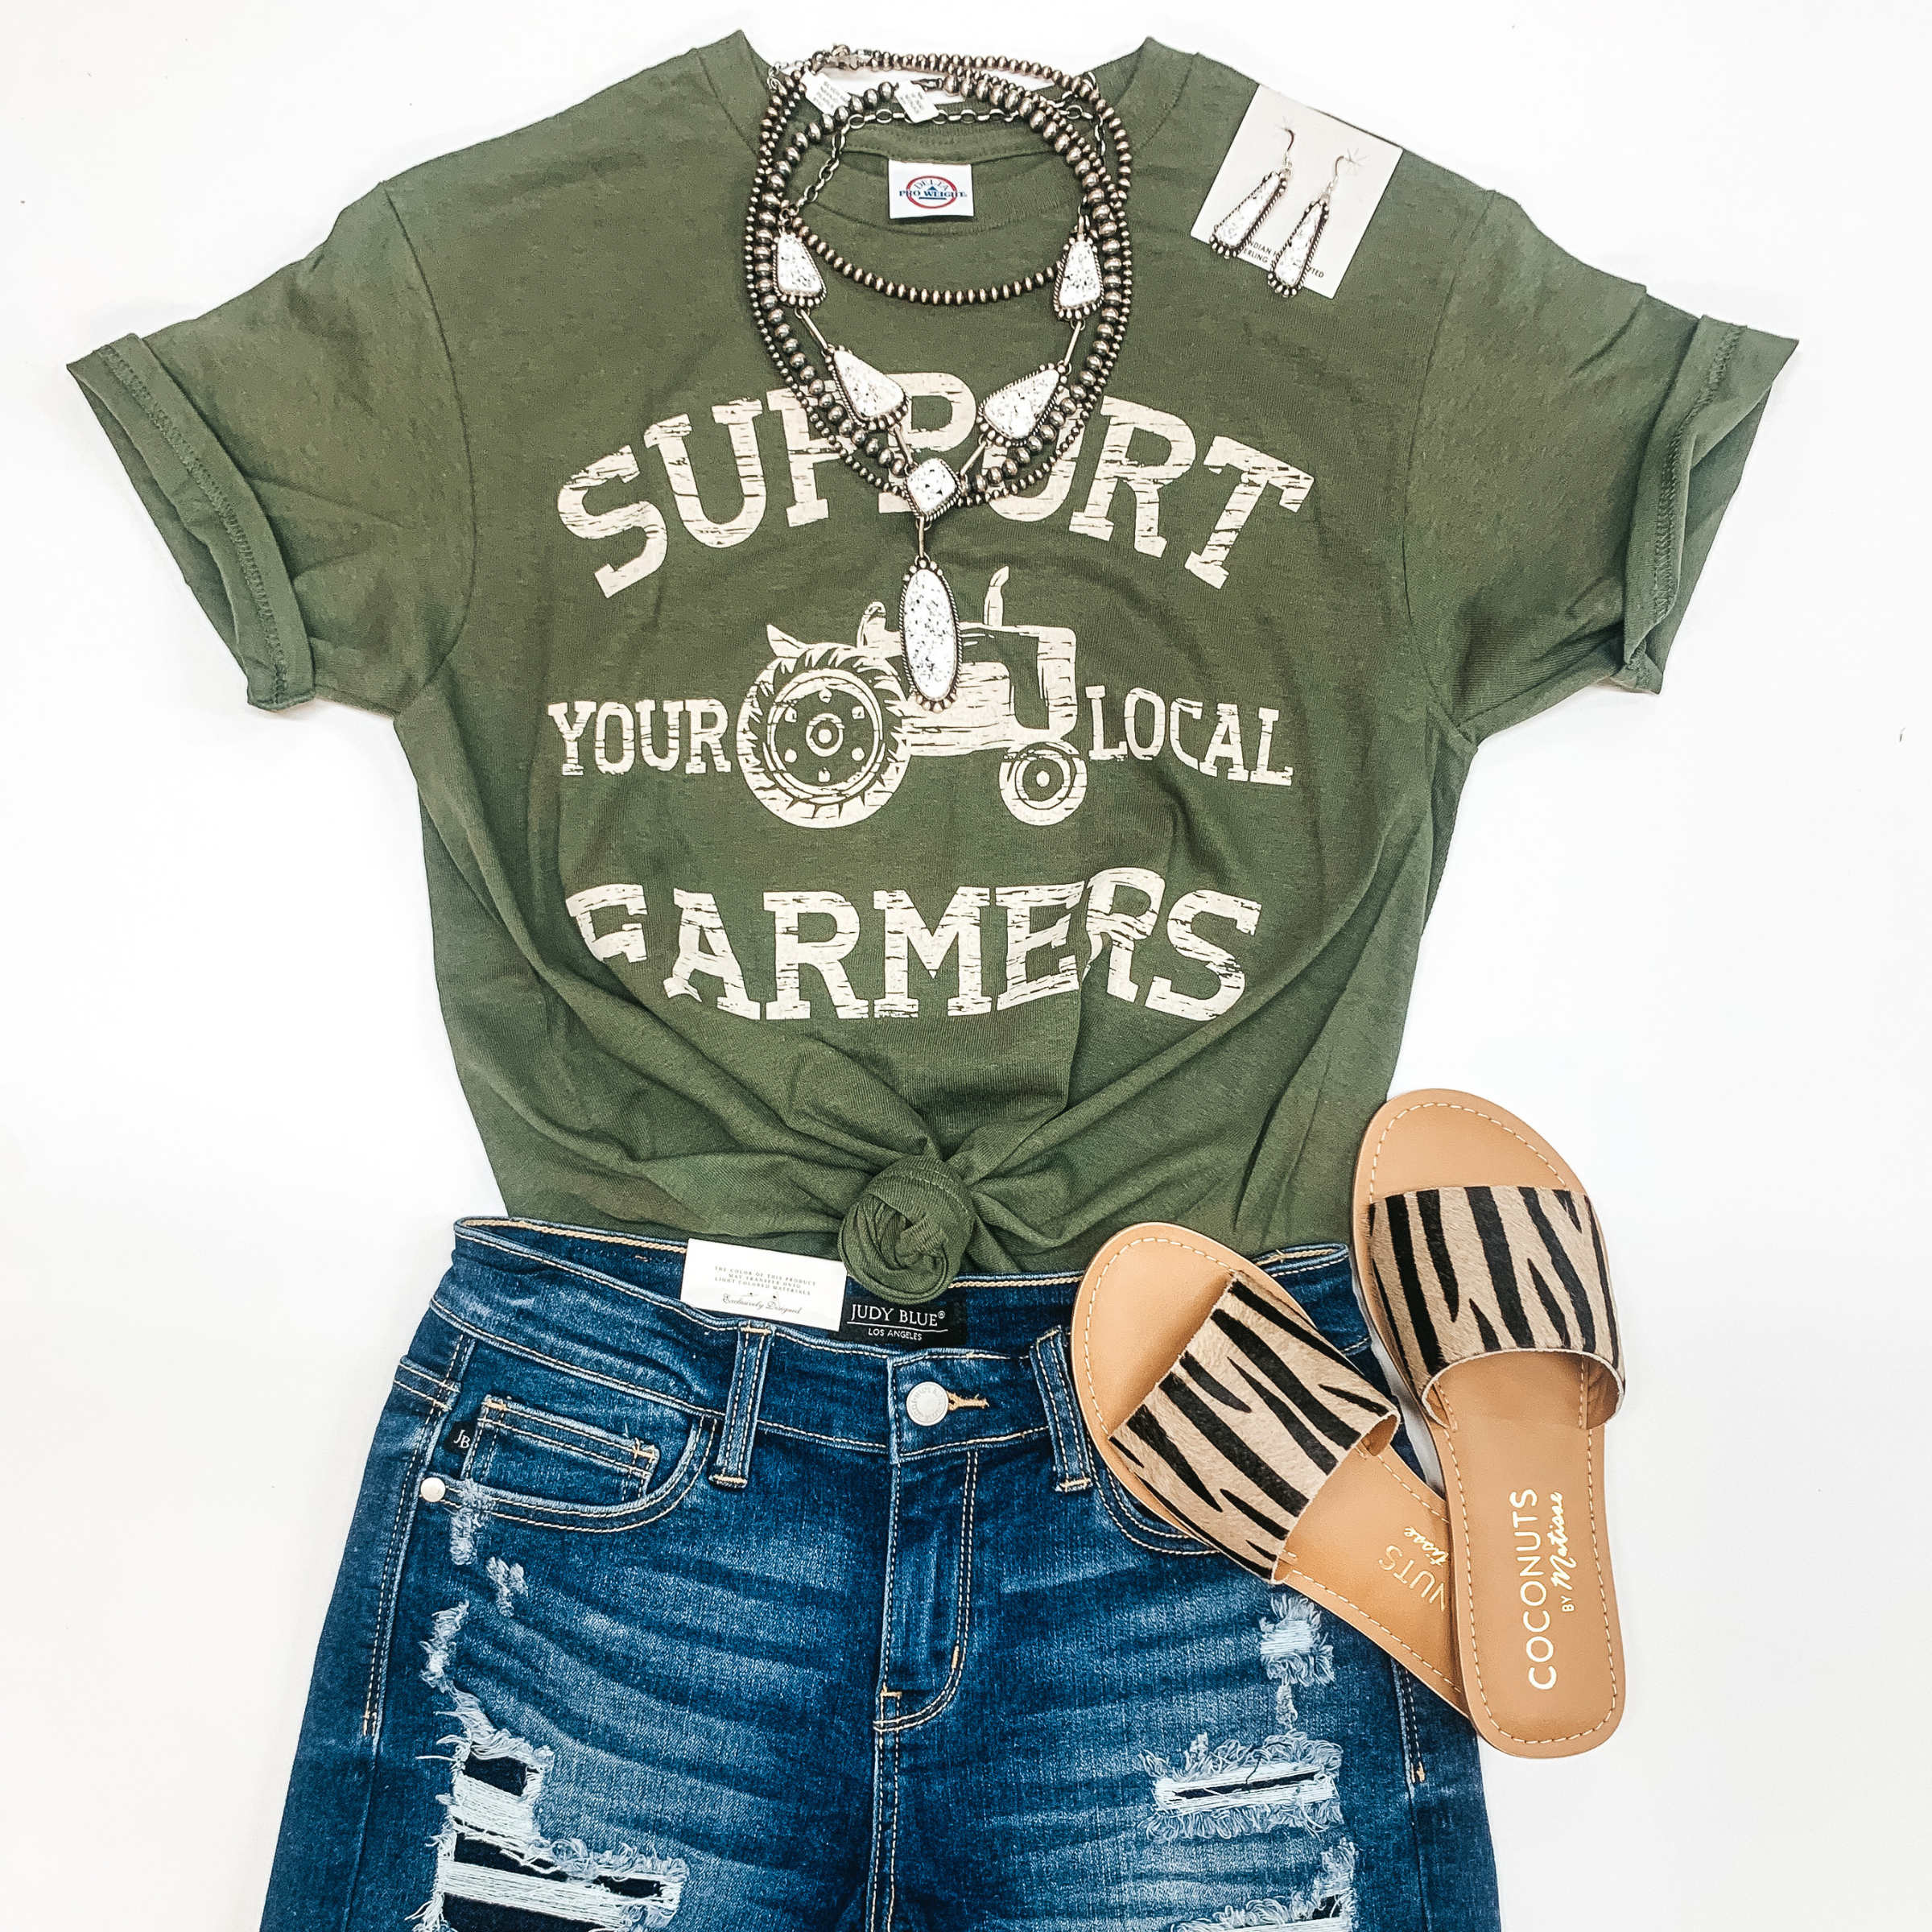 An olive green tee shirt with a tractor that says "Support your local farmers." Pictured with genuine Navajo jewelry, denim shorts, and sandals.